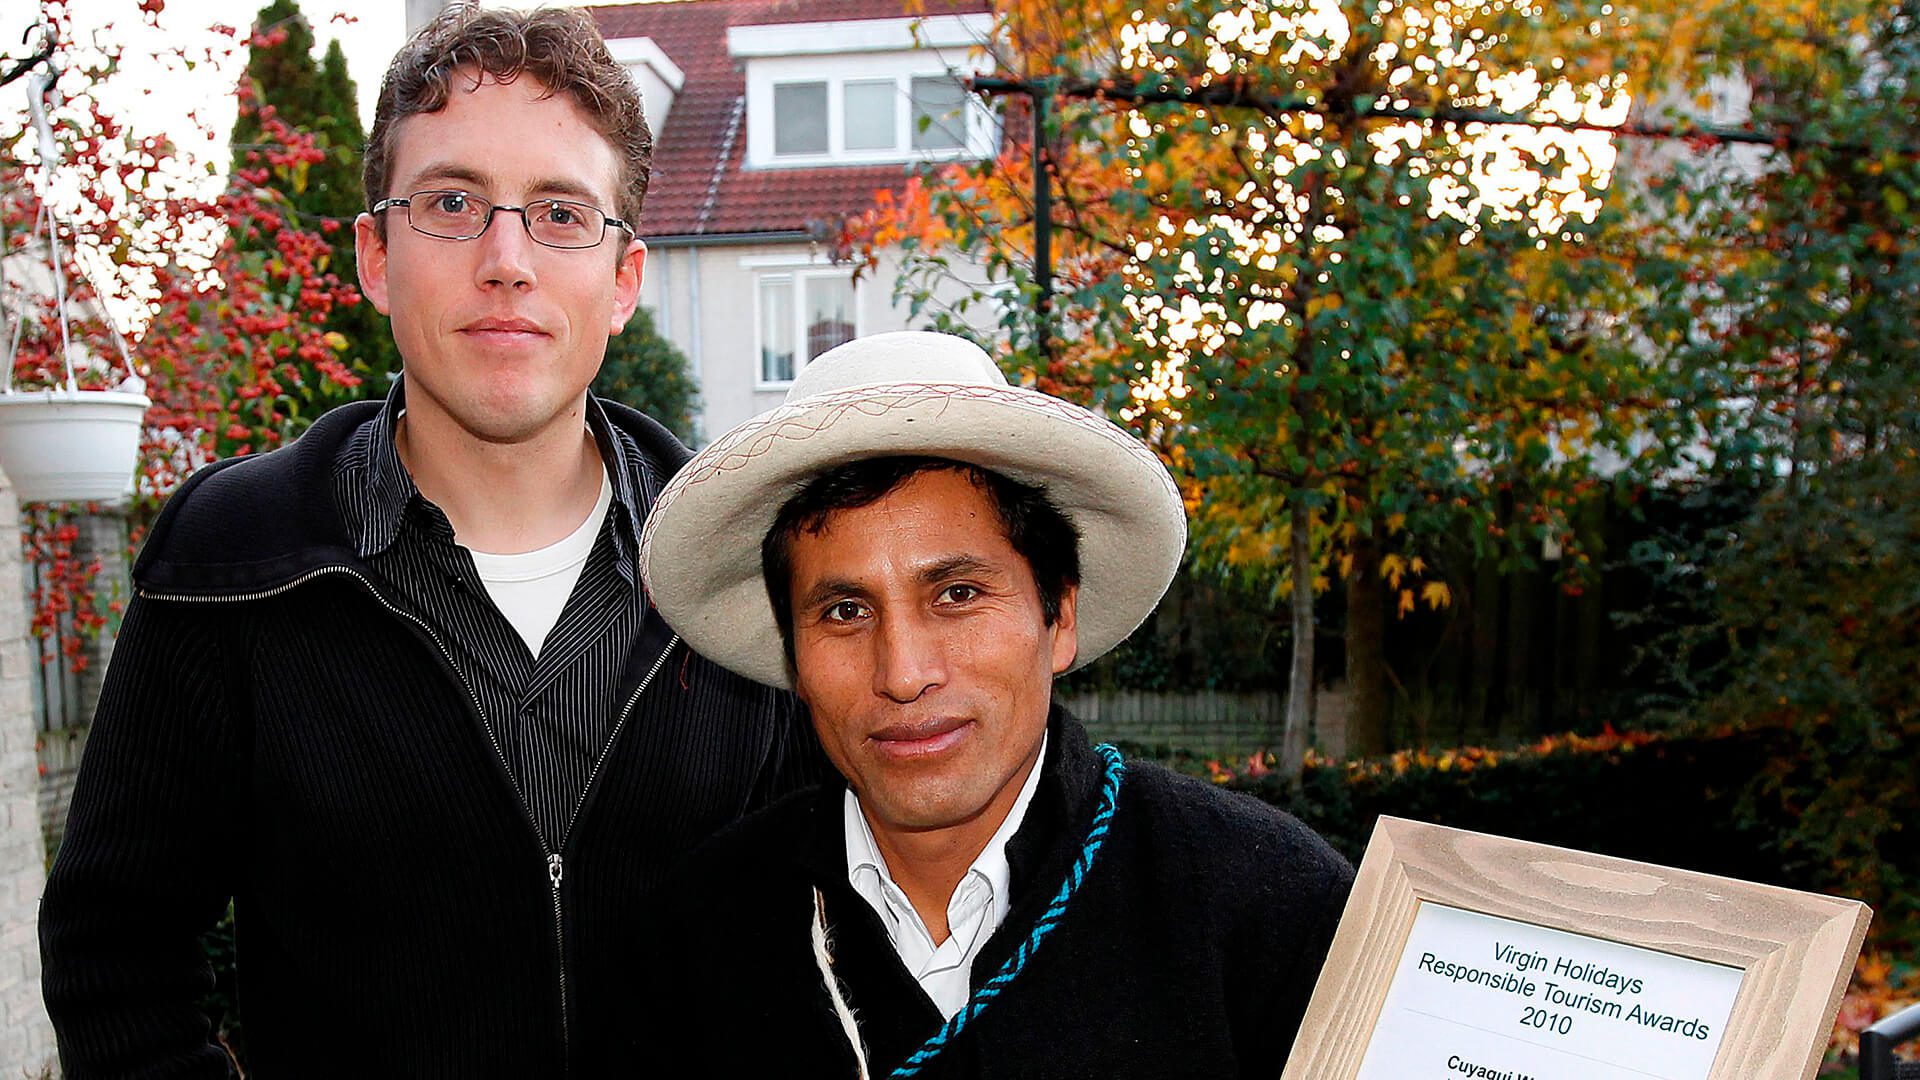 Guido and Pablo in The Netherlands after receiving award | RESPONSible Travel Peru